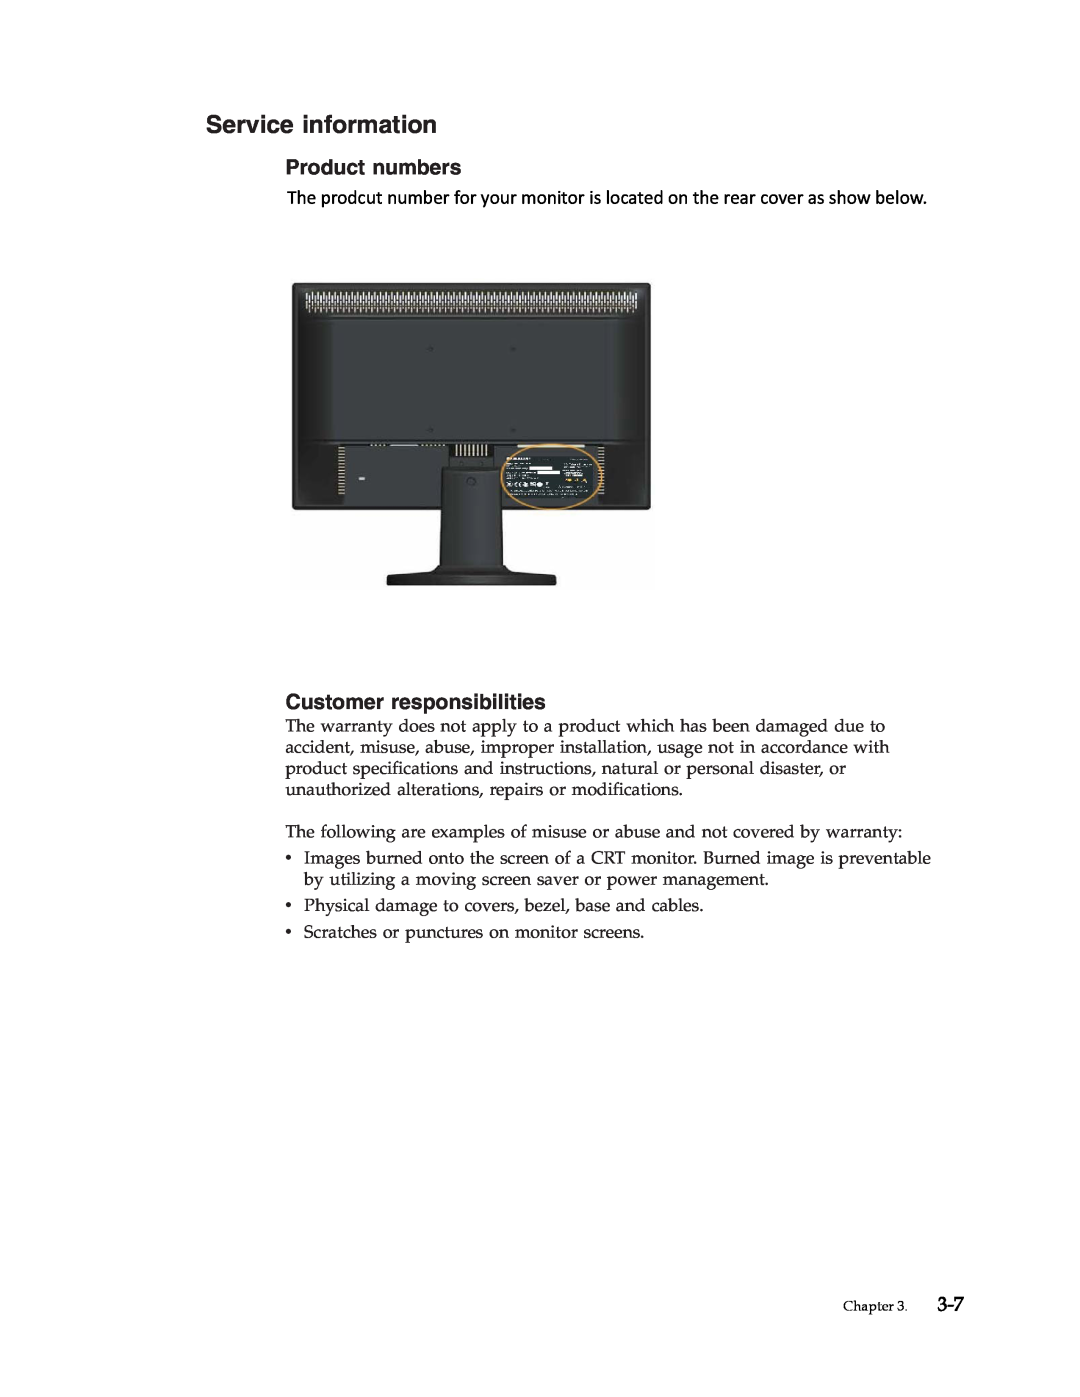 Lenovo 2580AF1 manual Service information, Product numbers, Customer responsibilities 